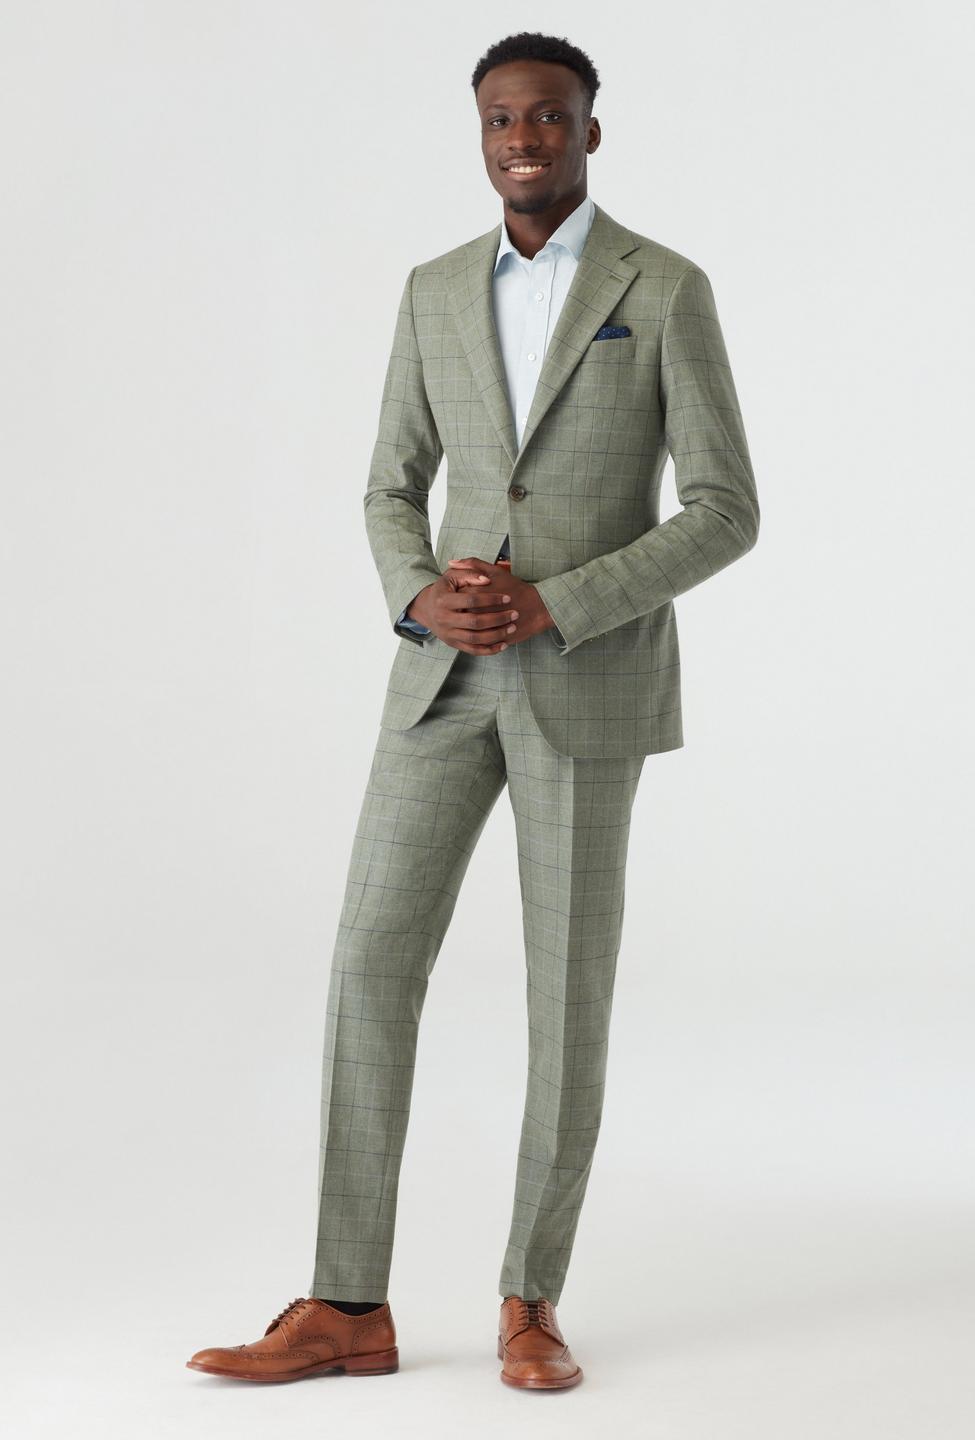 Green suit - Checked Design from british Indochino Collection